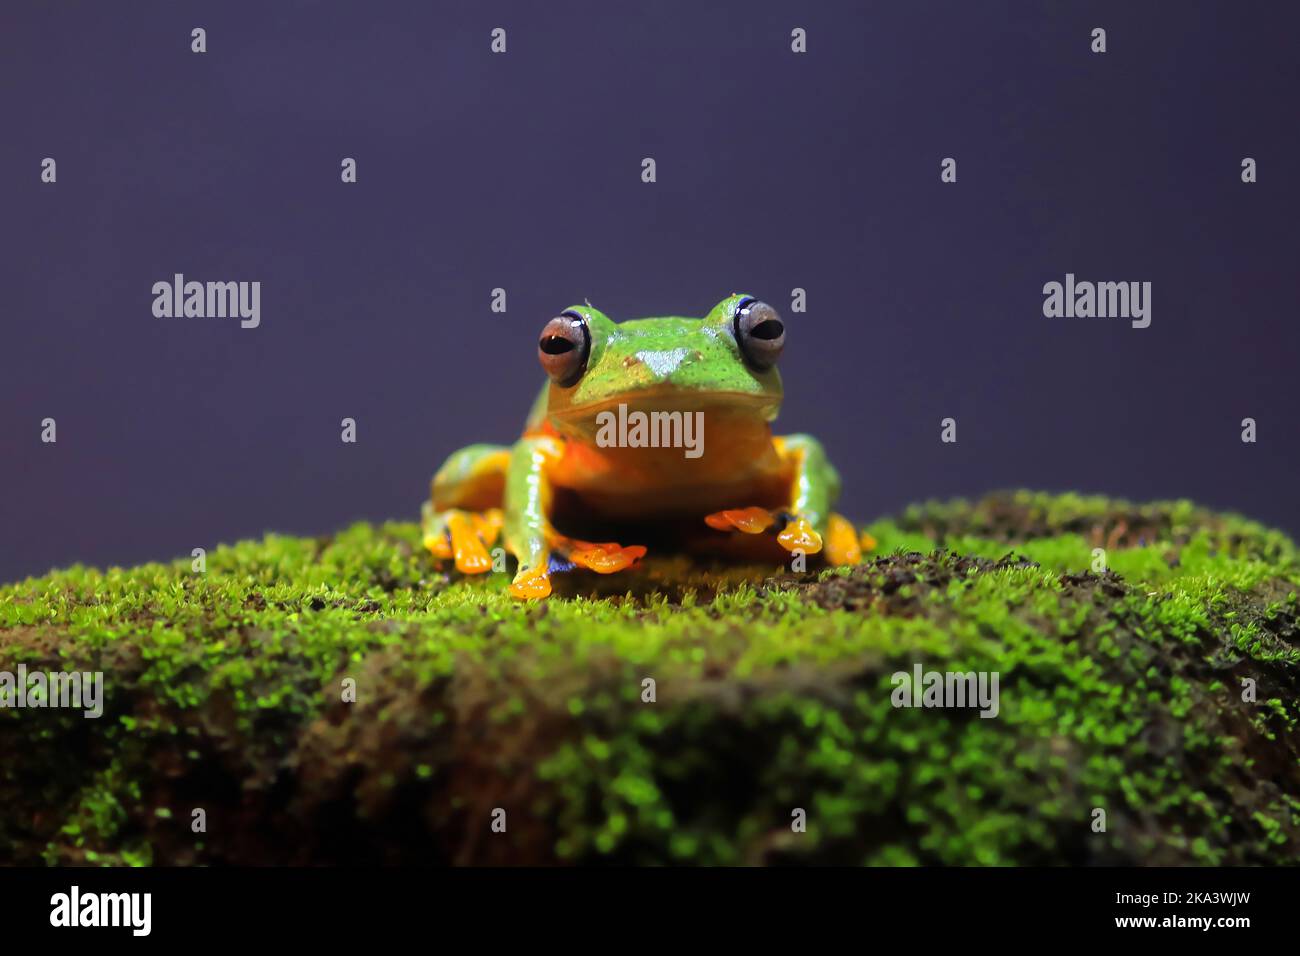 Small tree frog on moss covered stone